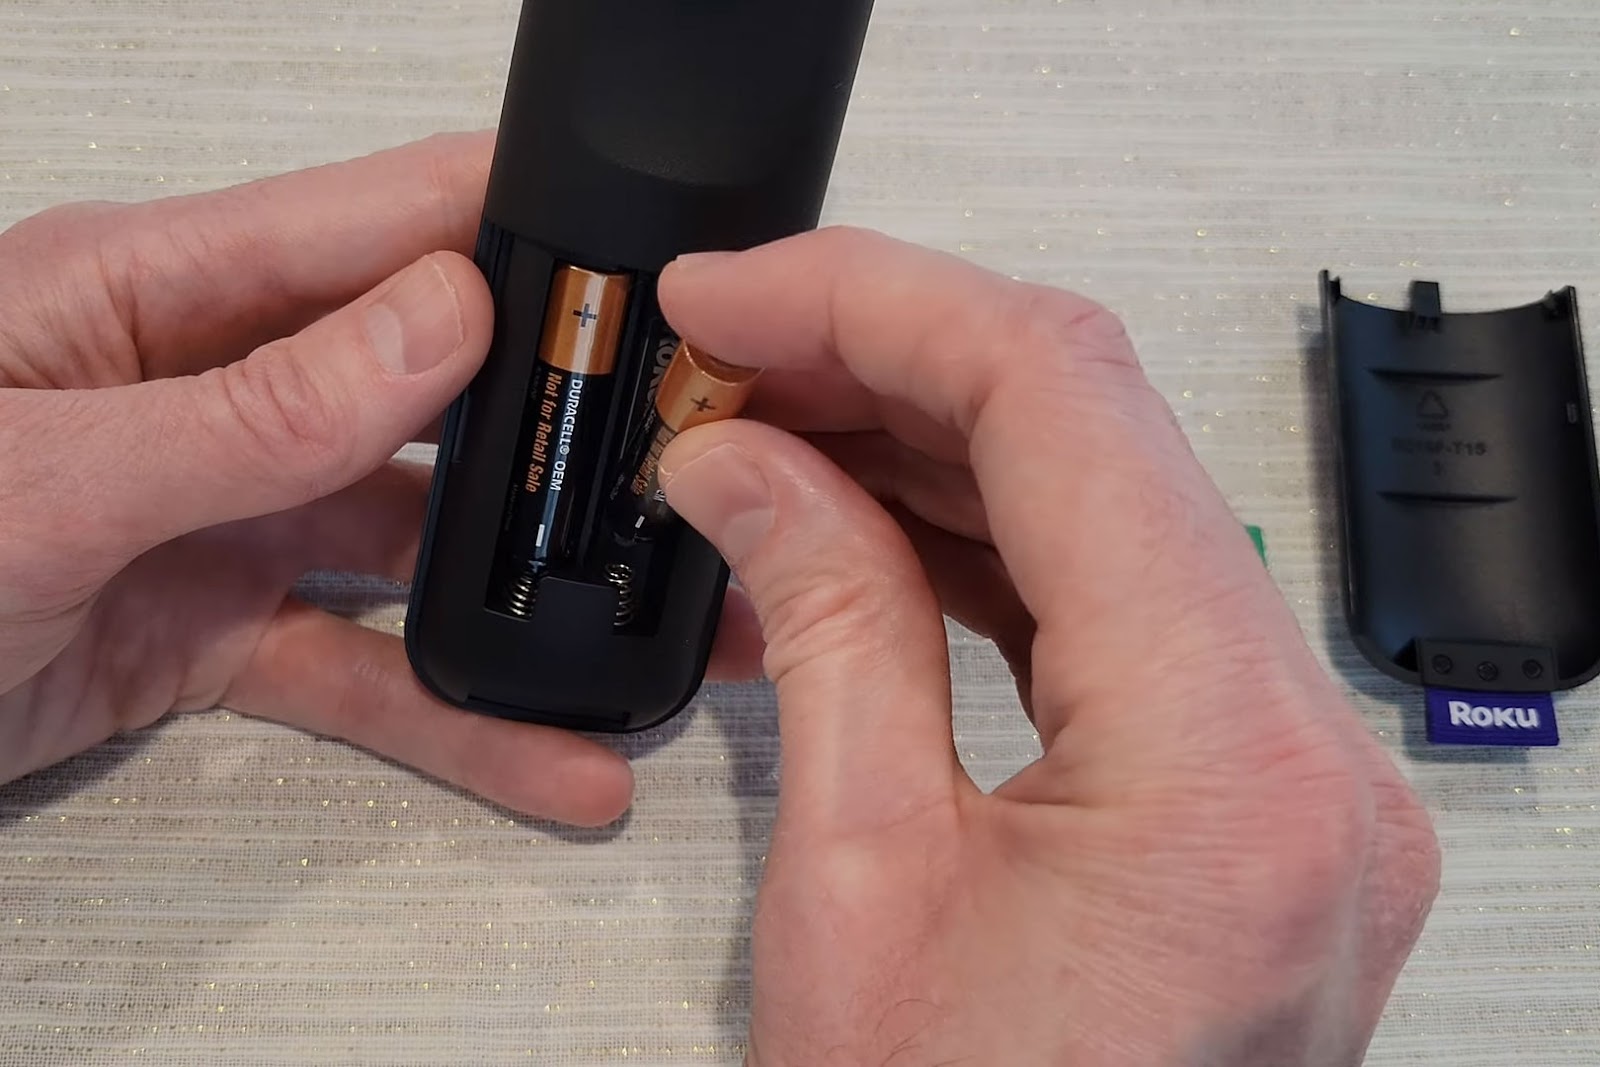 Place the Batteries on the Hisense Roku Remote